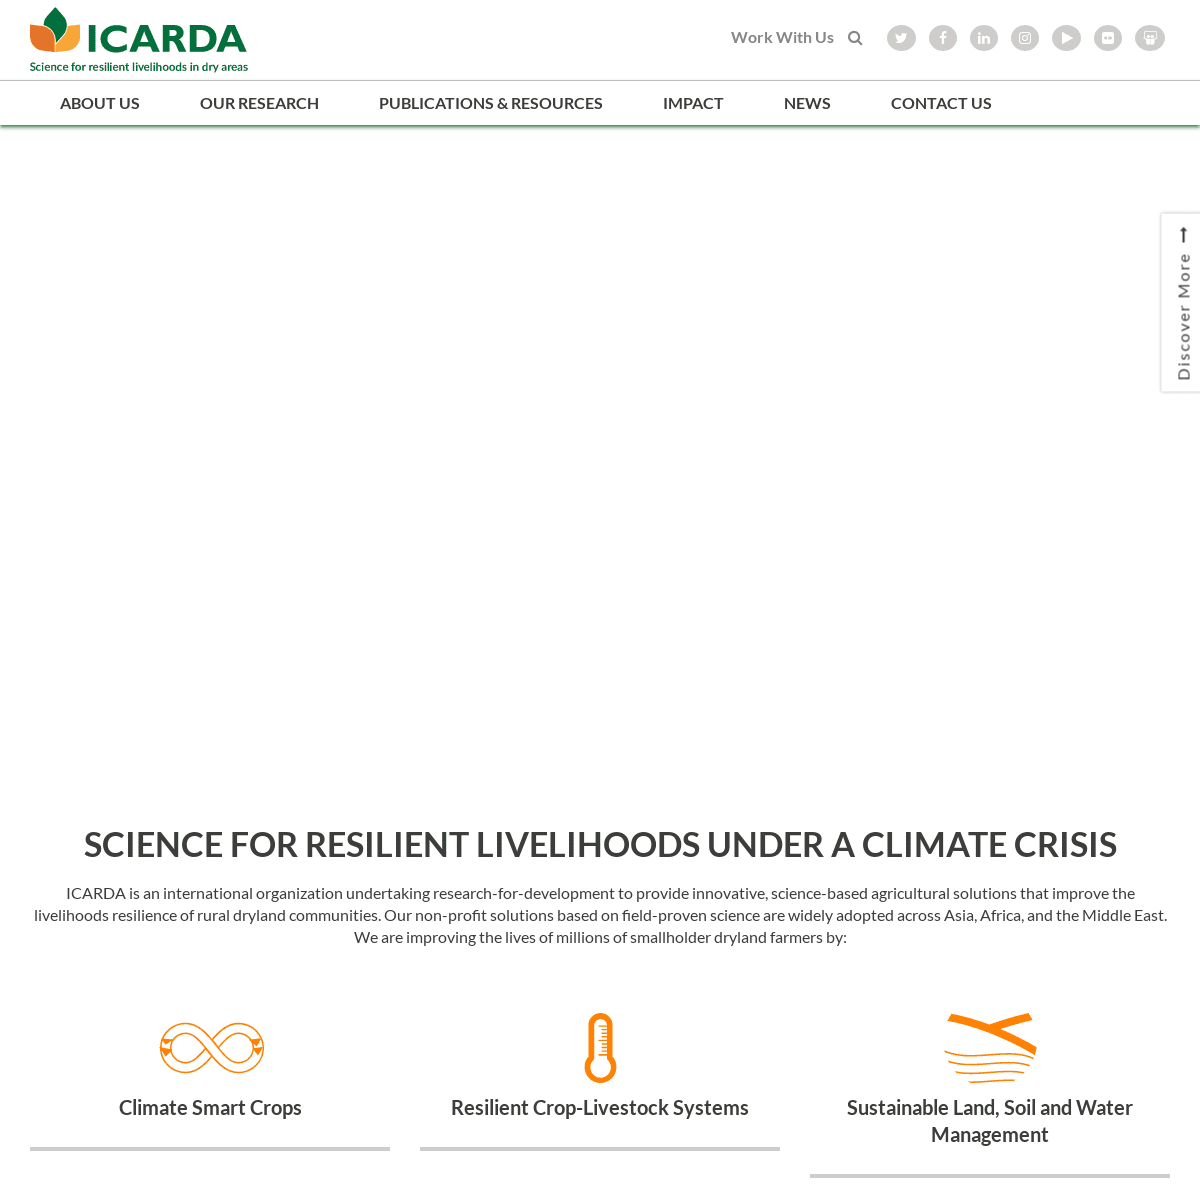 A complete backup of https://icarda.org